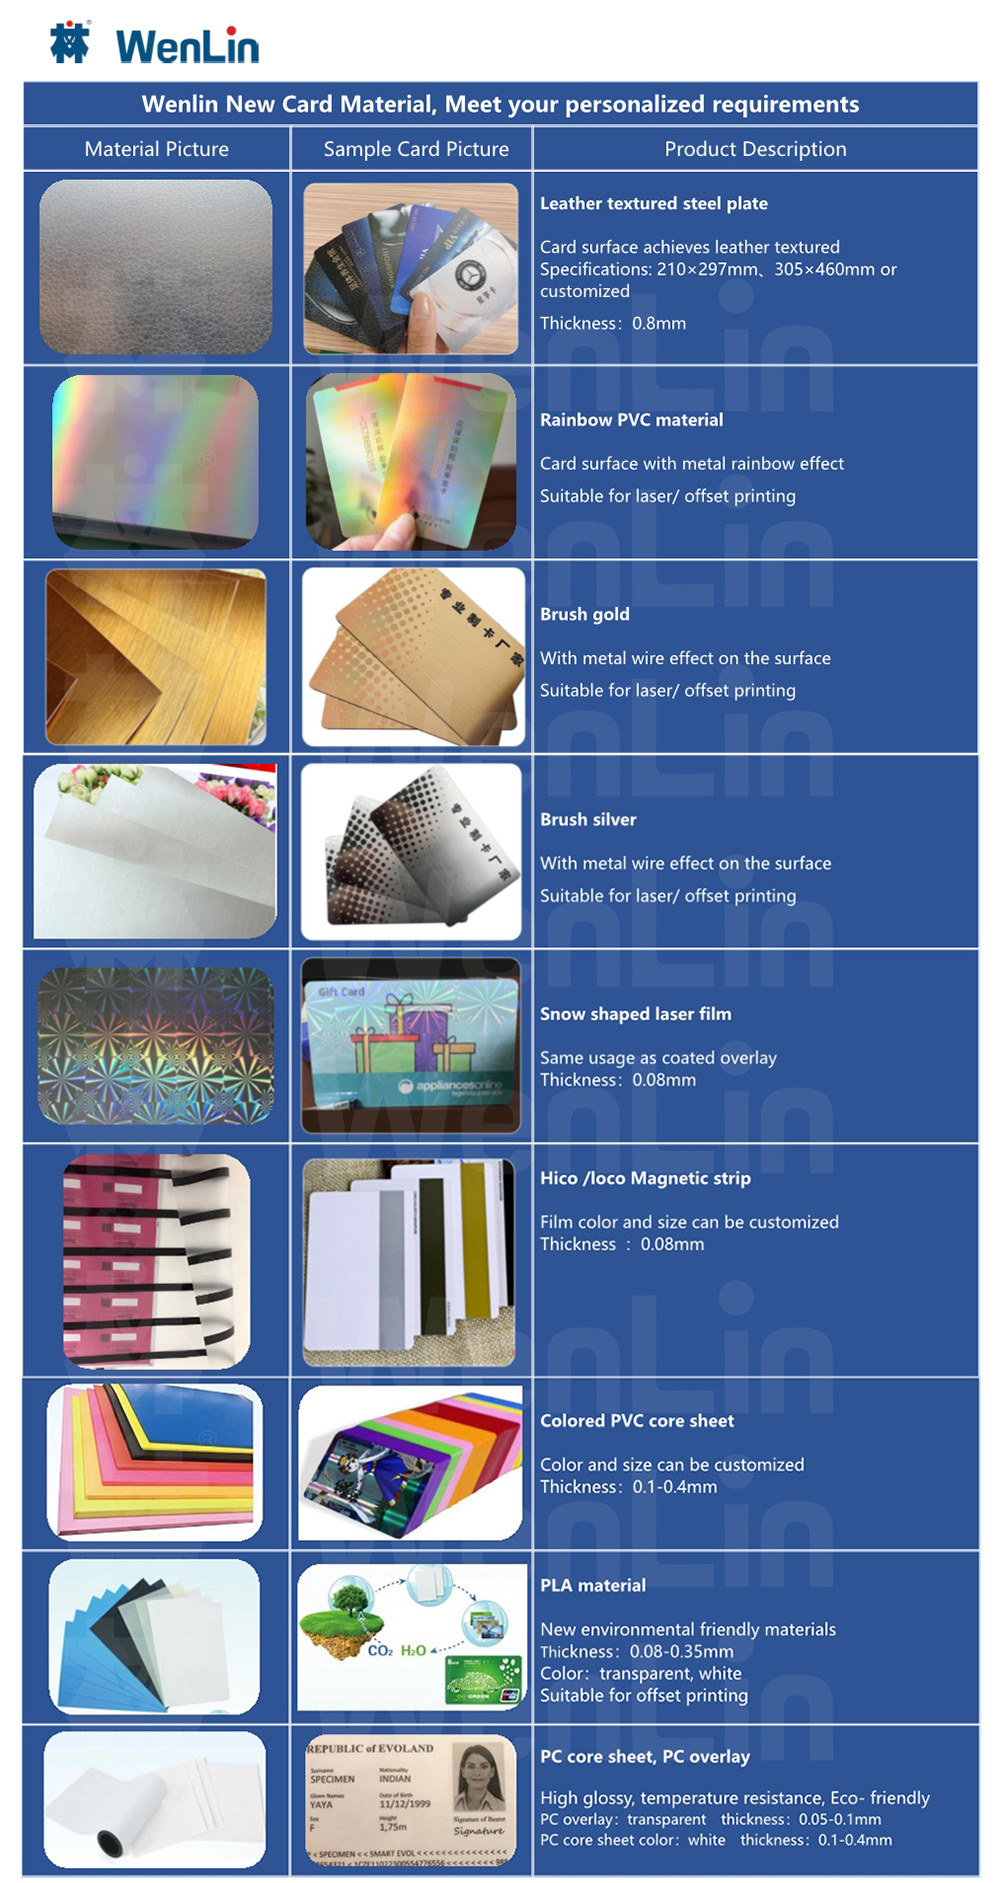 Wenlin New Card Material, Meet your personalized requirements.jpg